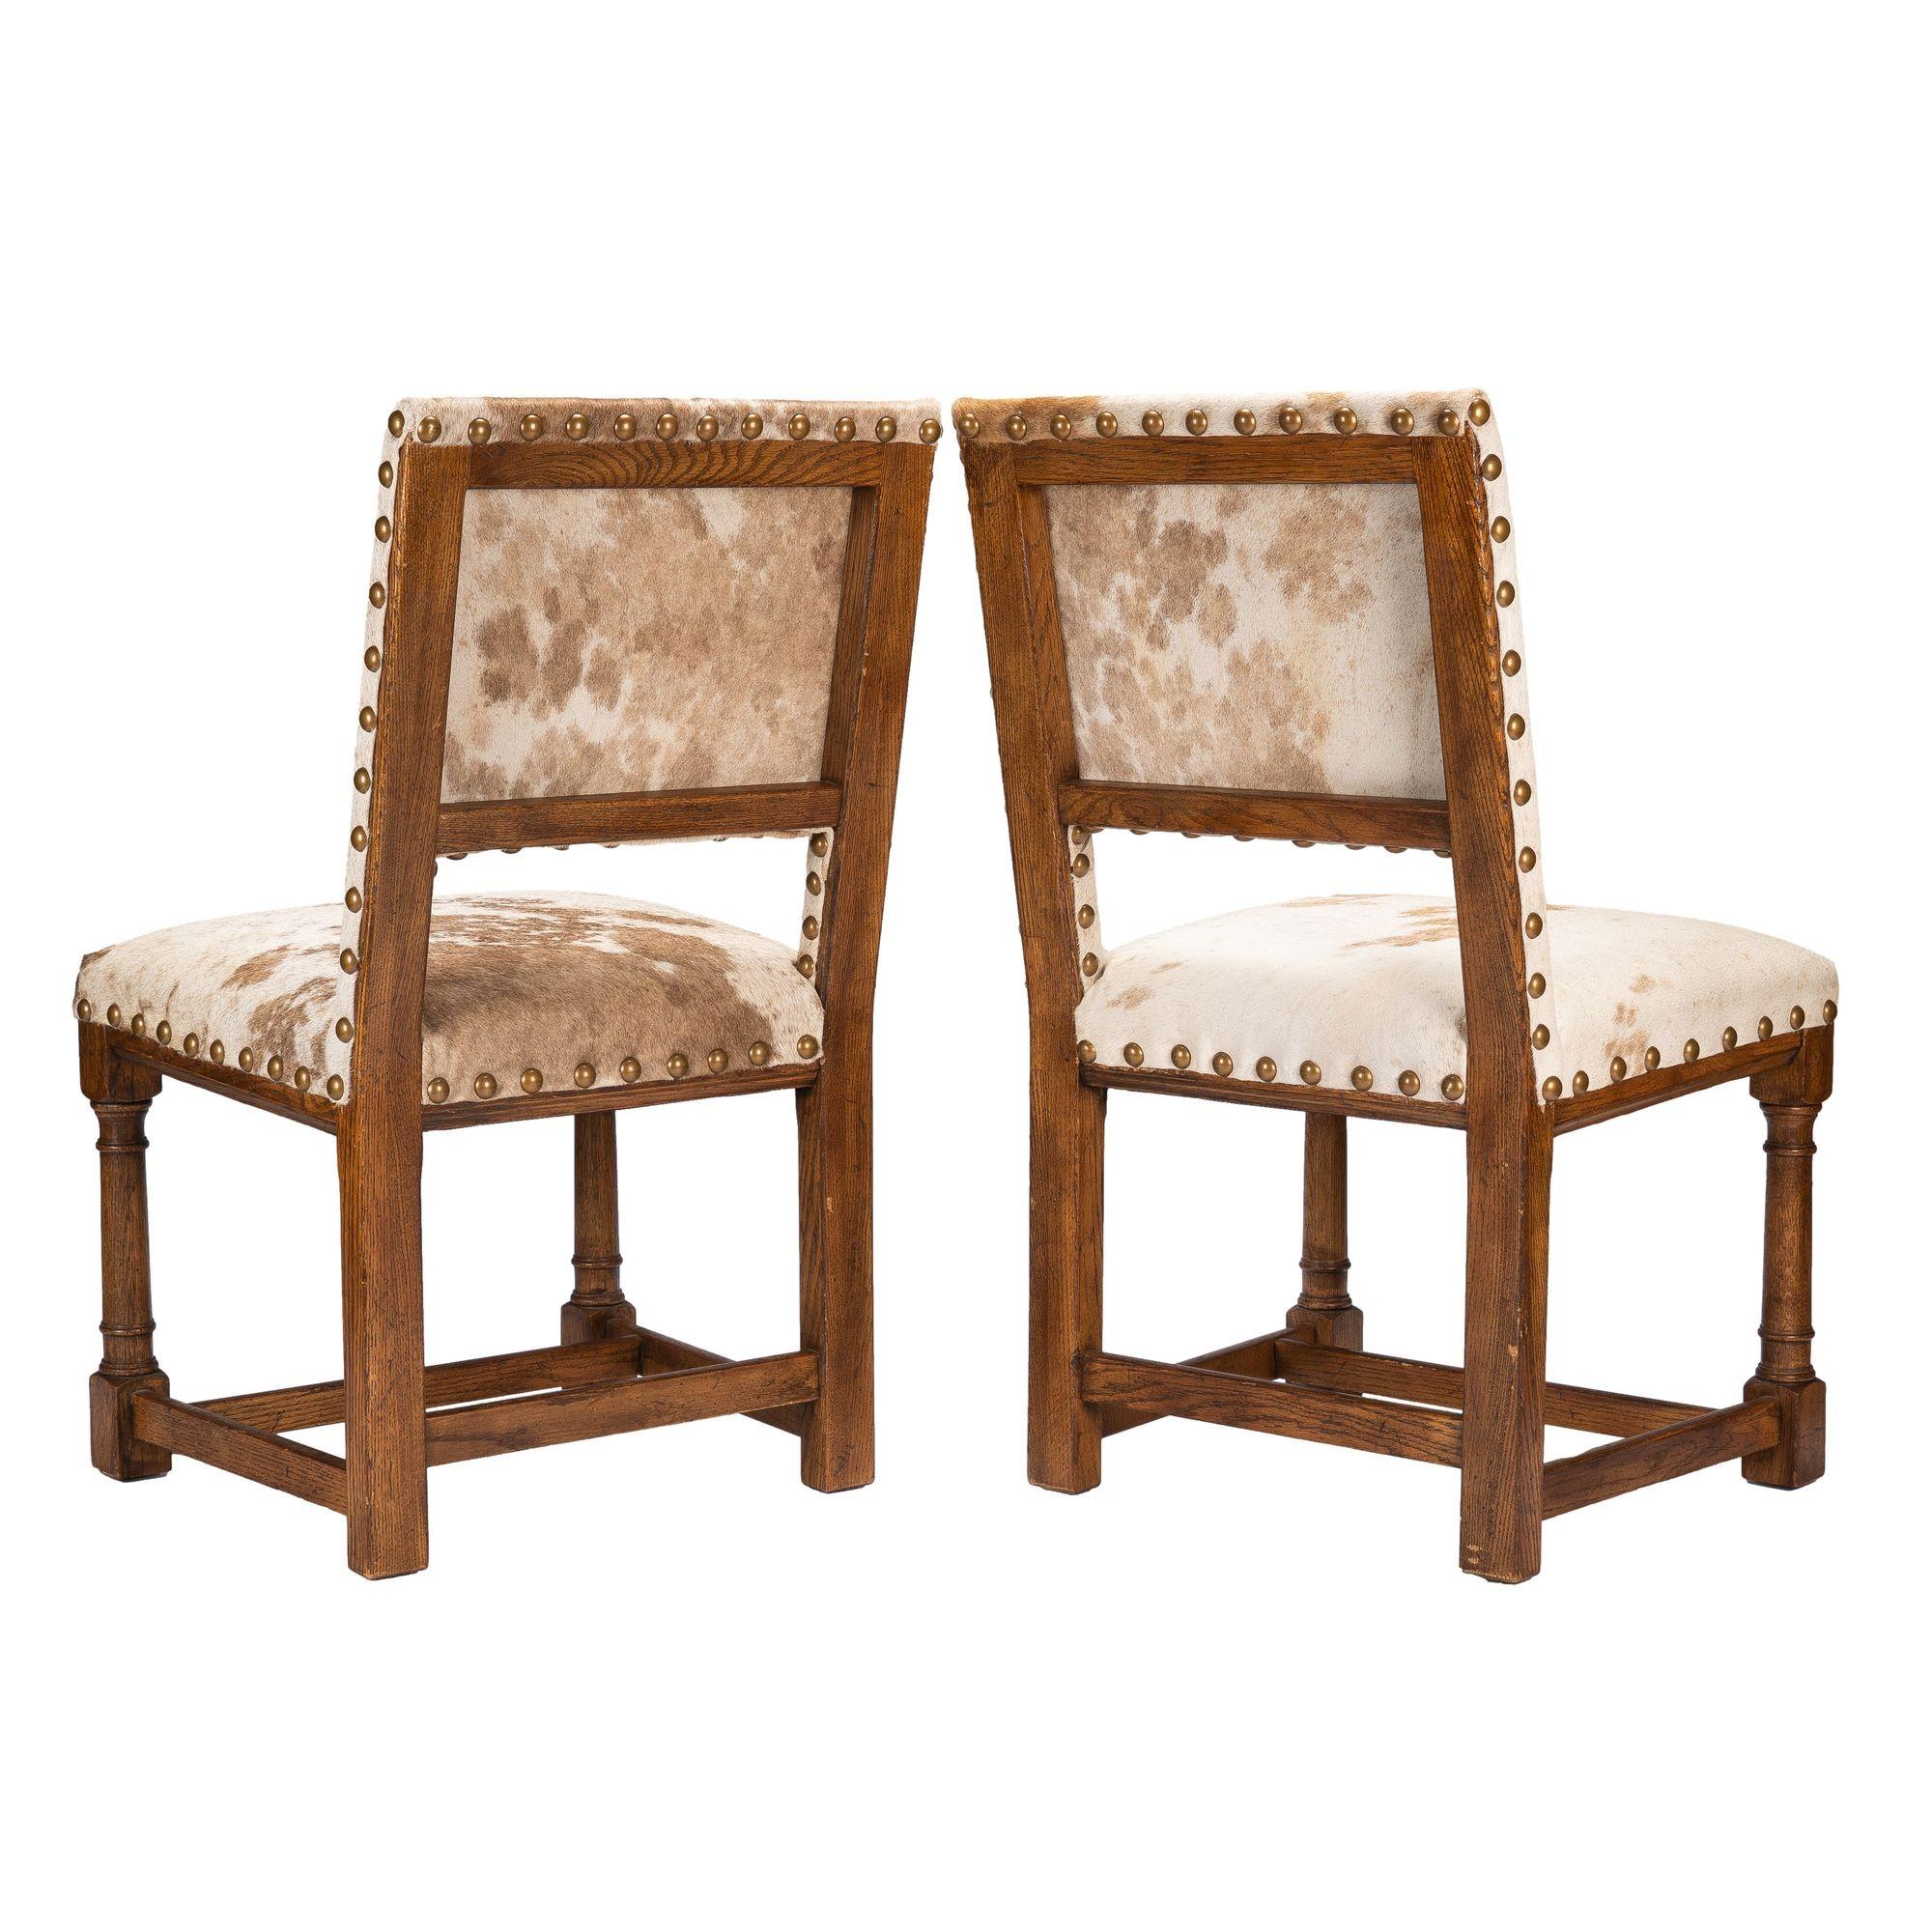 Pair of Jacobean style hair on hide oak side chairs, 1920-35 For Sale 1